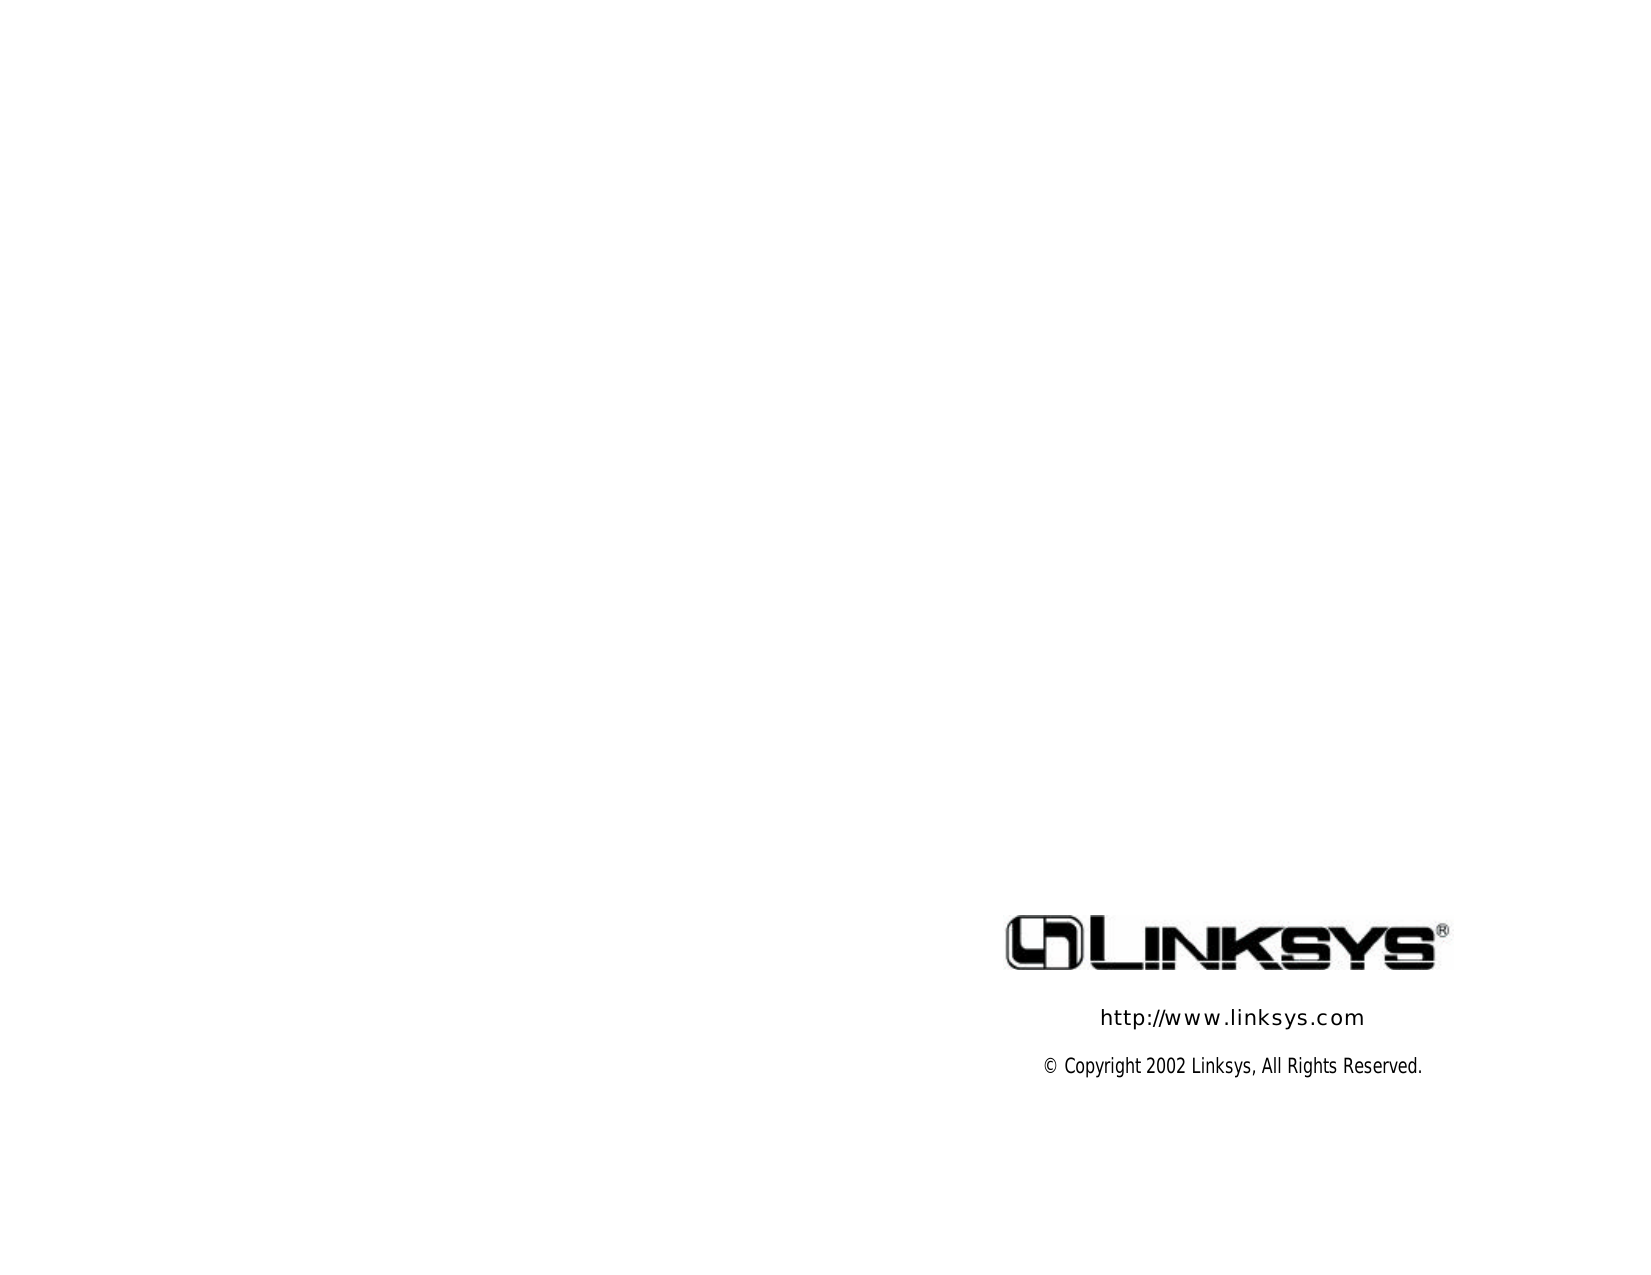 © Copyright 2002 Linksys, All Rights Reserved.http://www.linksys.com